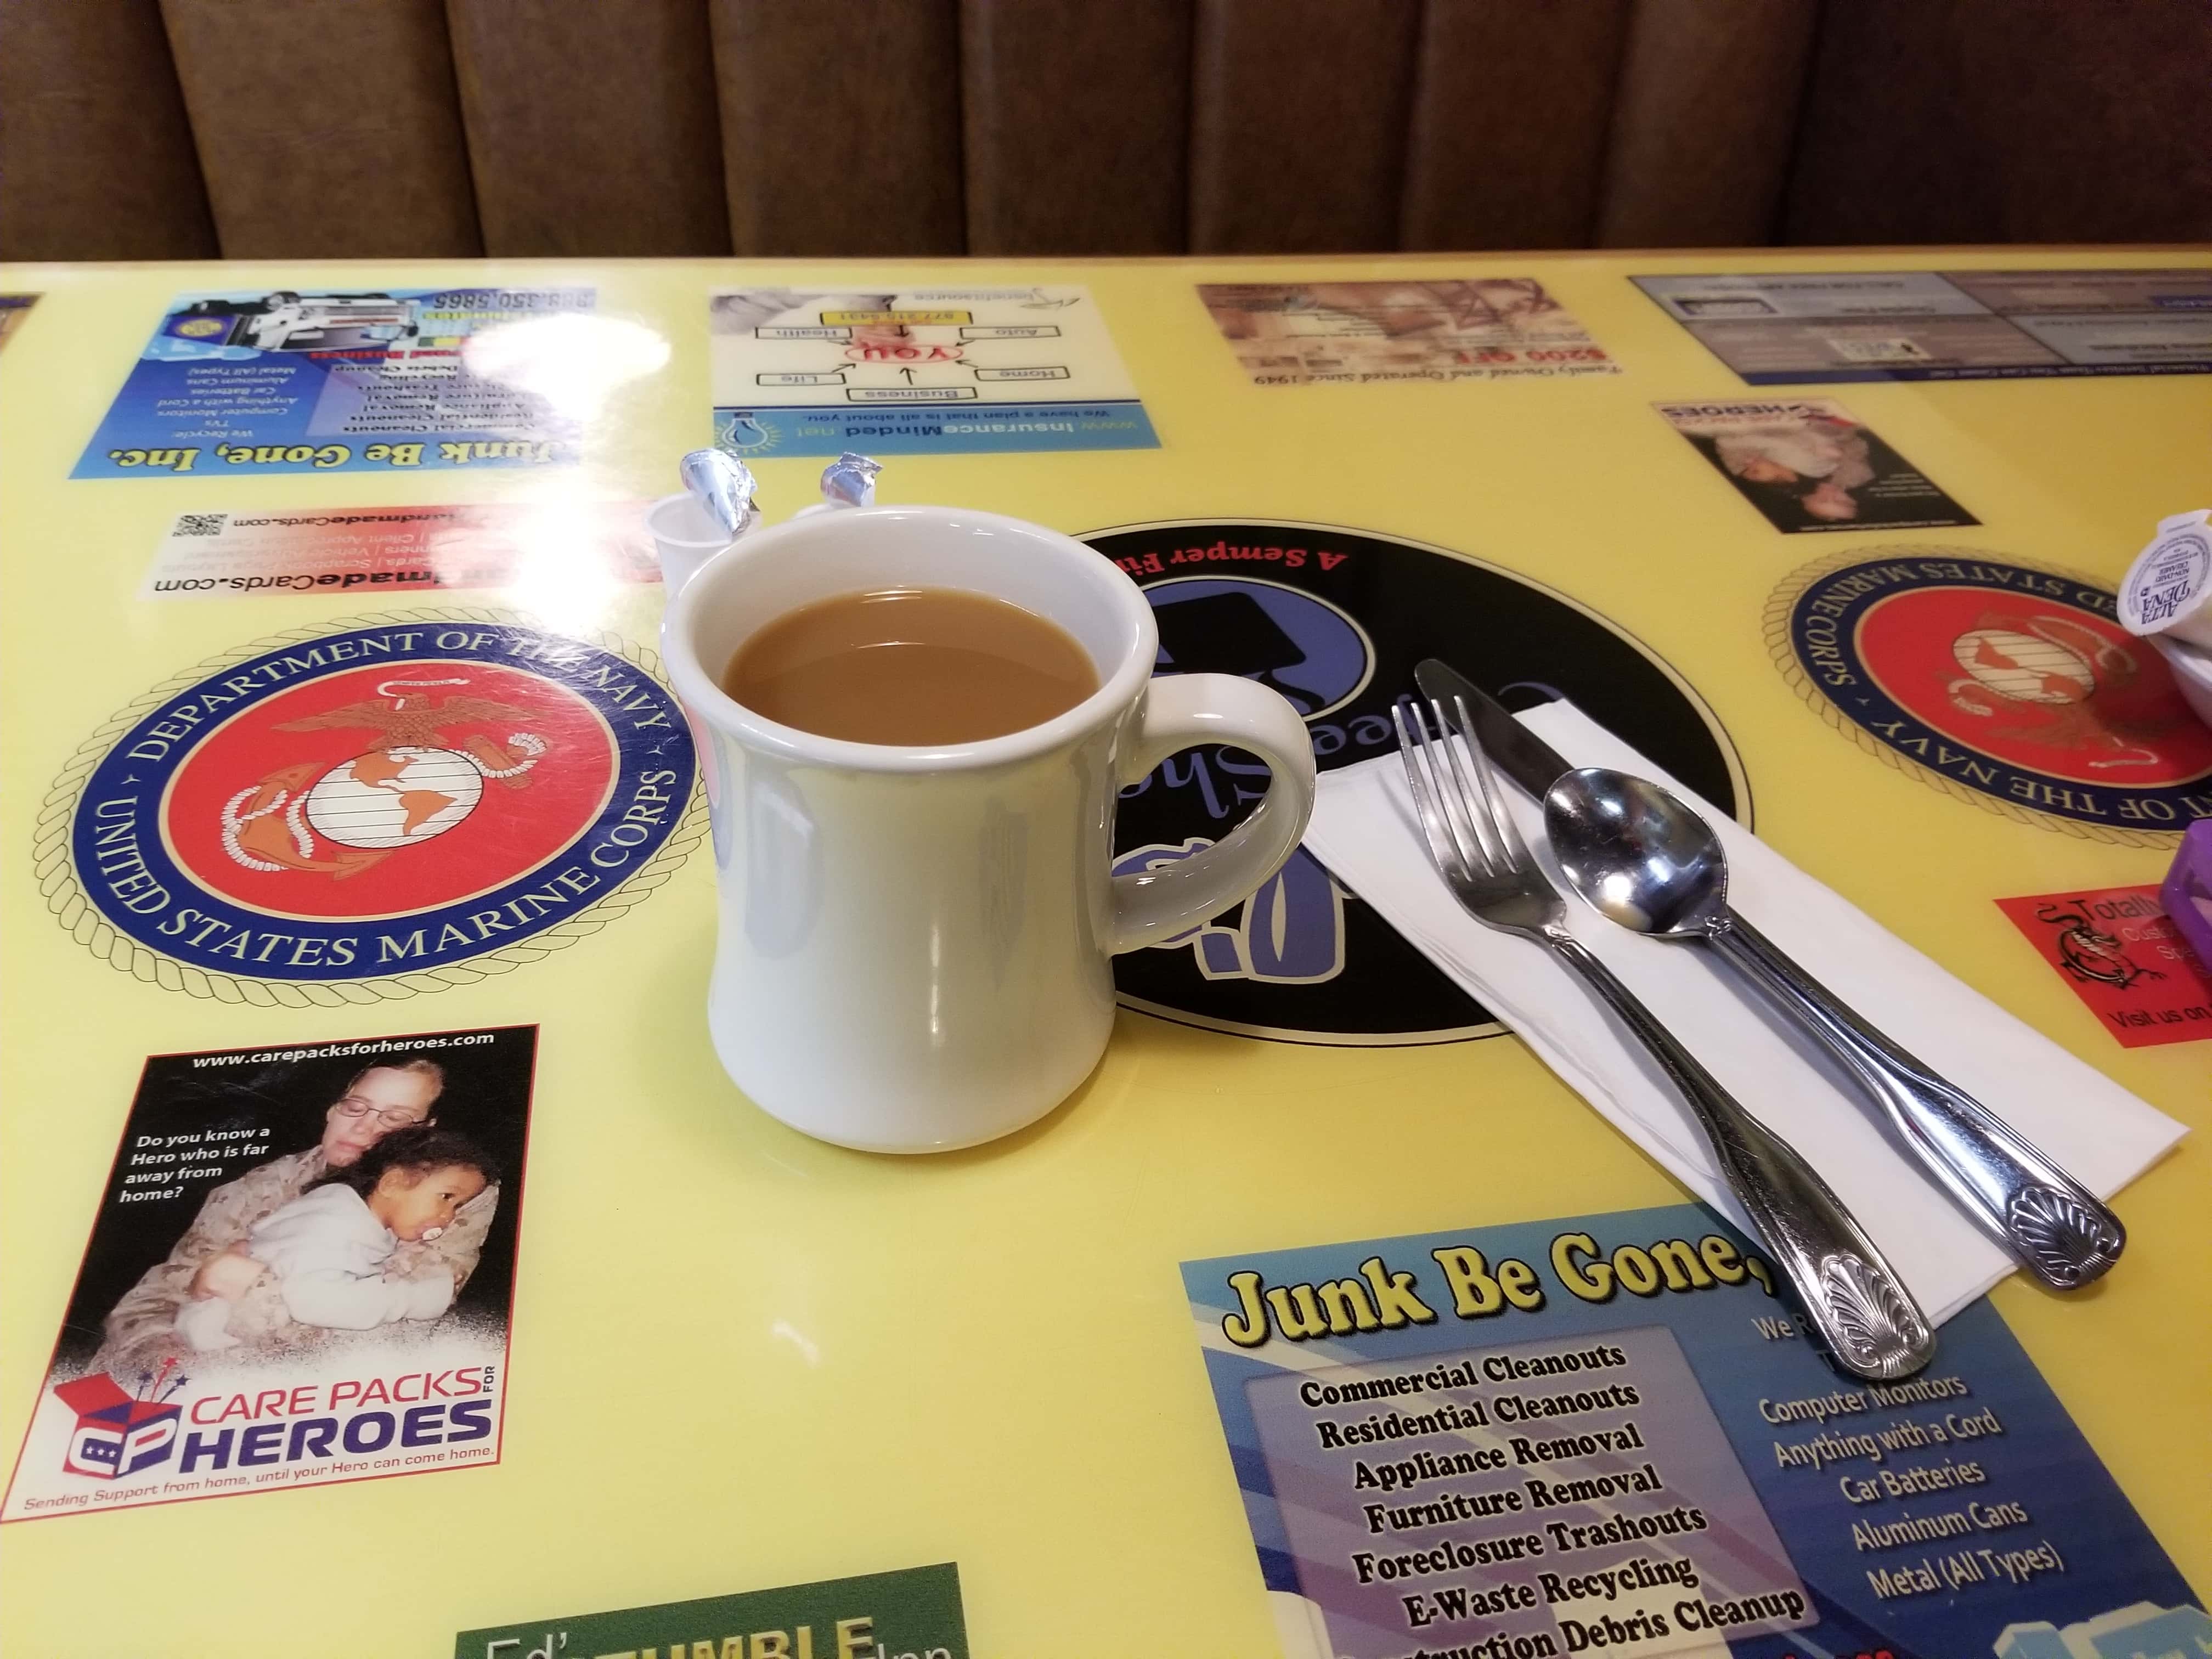 Paul s Coffee Shop - Fountain Valley, CA, US, cafe near me now